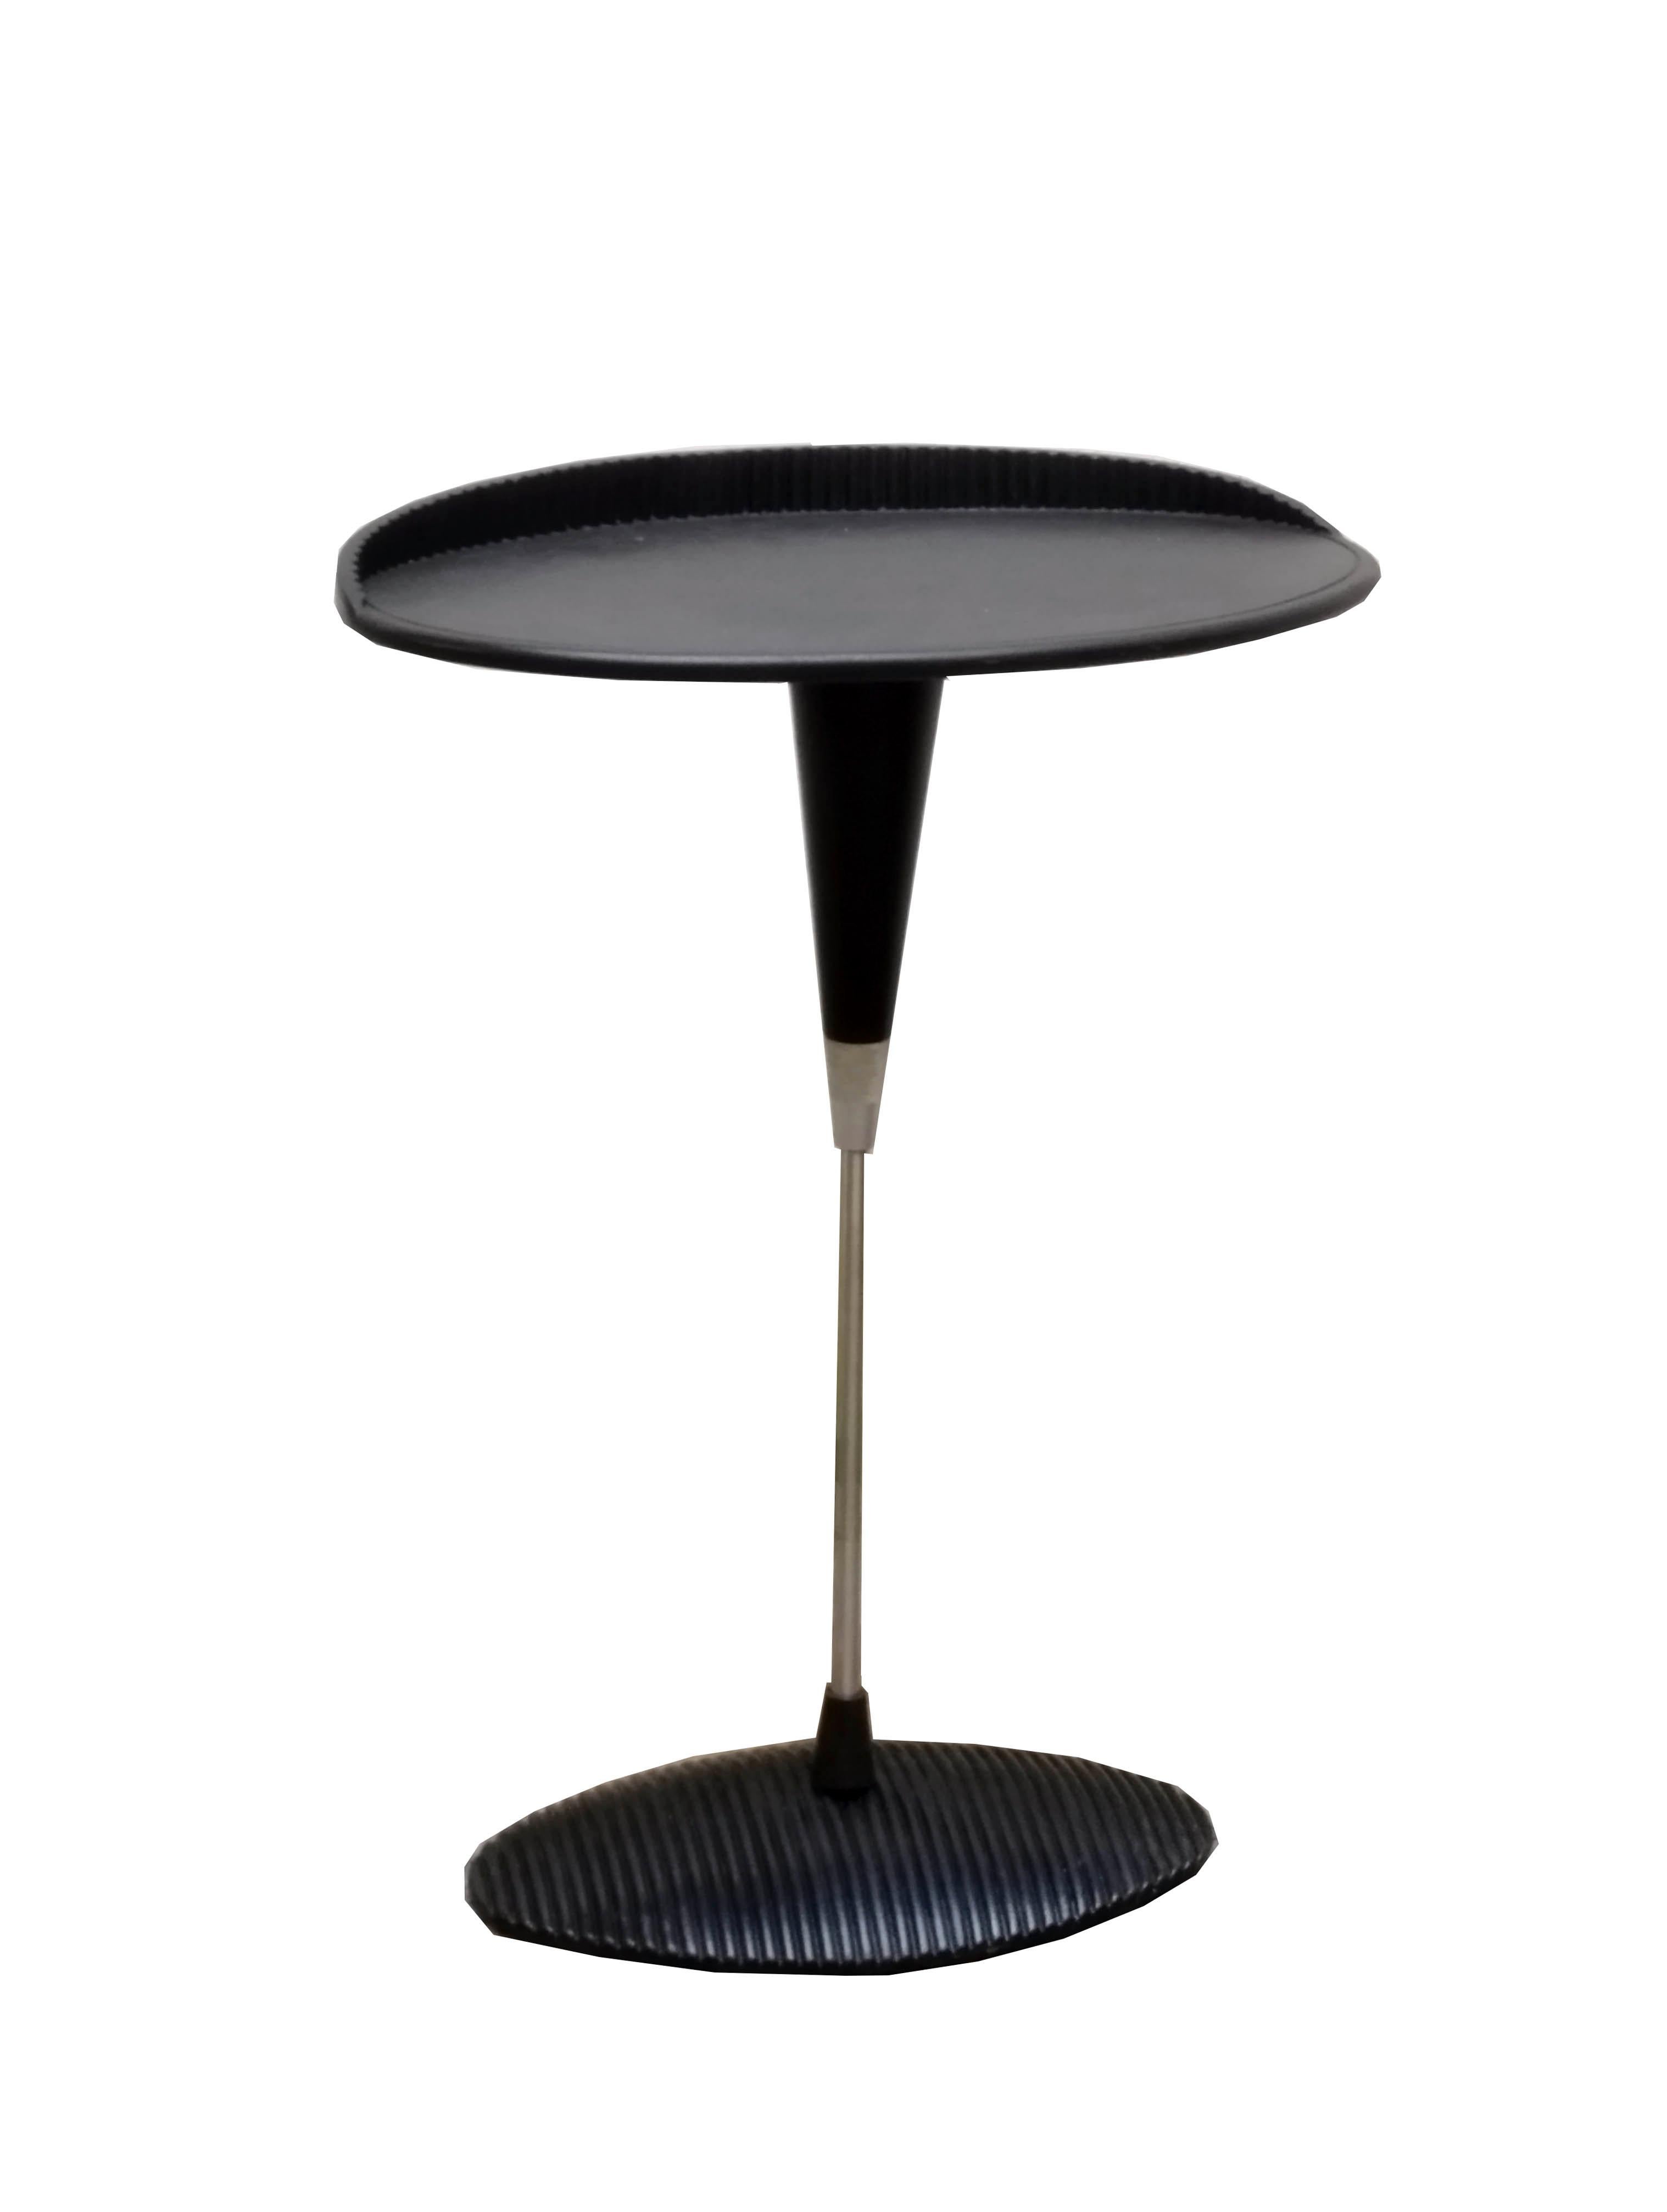 Italian coffee table or bedside table of variable height with steel frame, base with black moulded shell and black acrylic top. The shape of the table immediately defines the aesthetic value of the piece of furniture itself: it is shaped and this